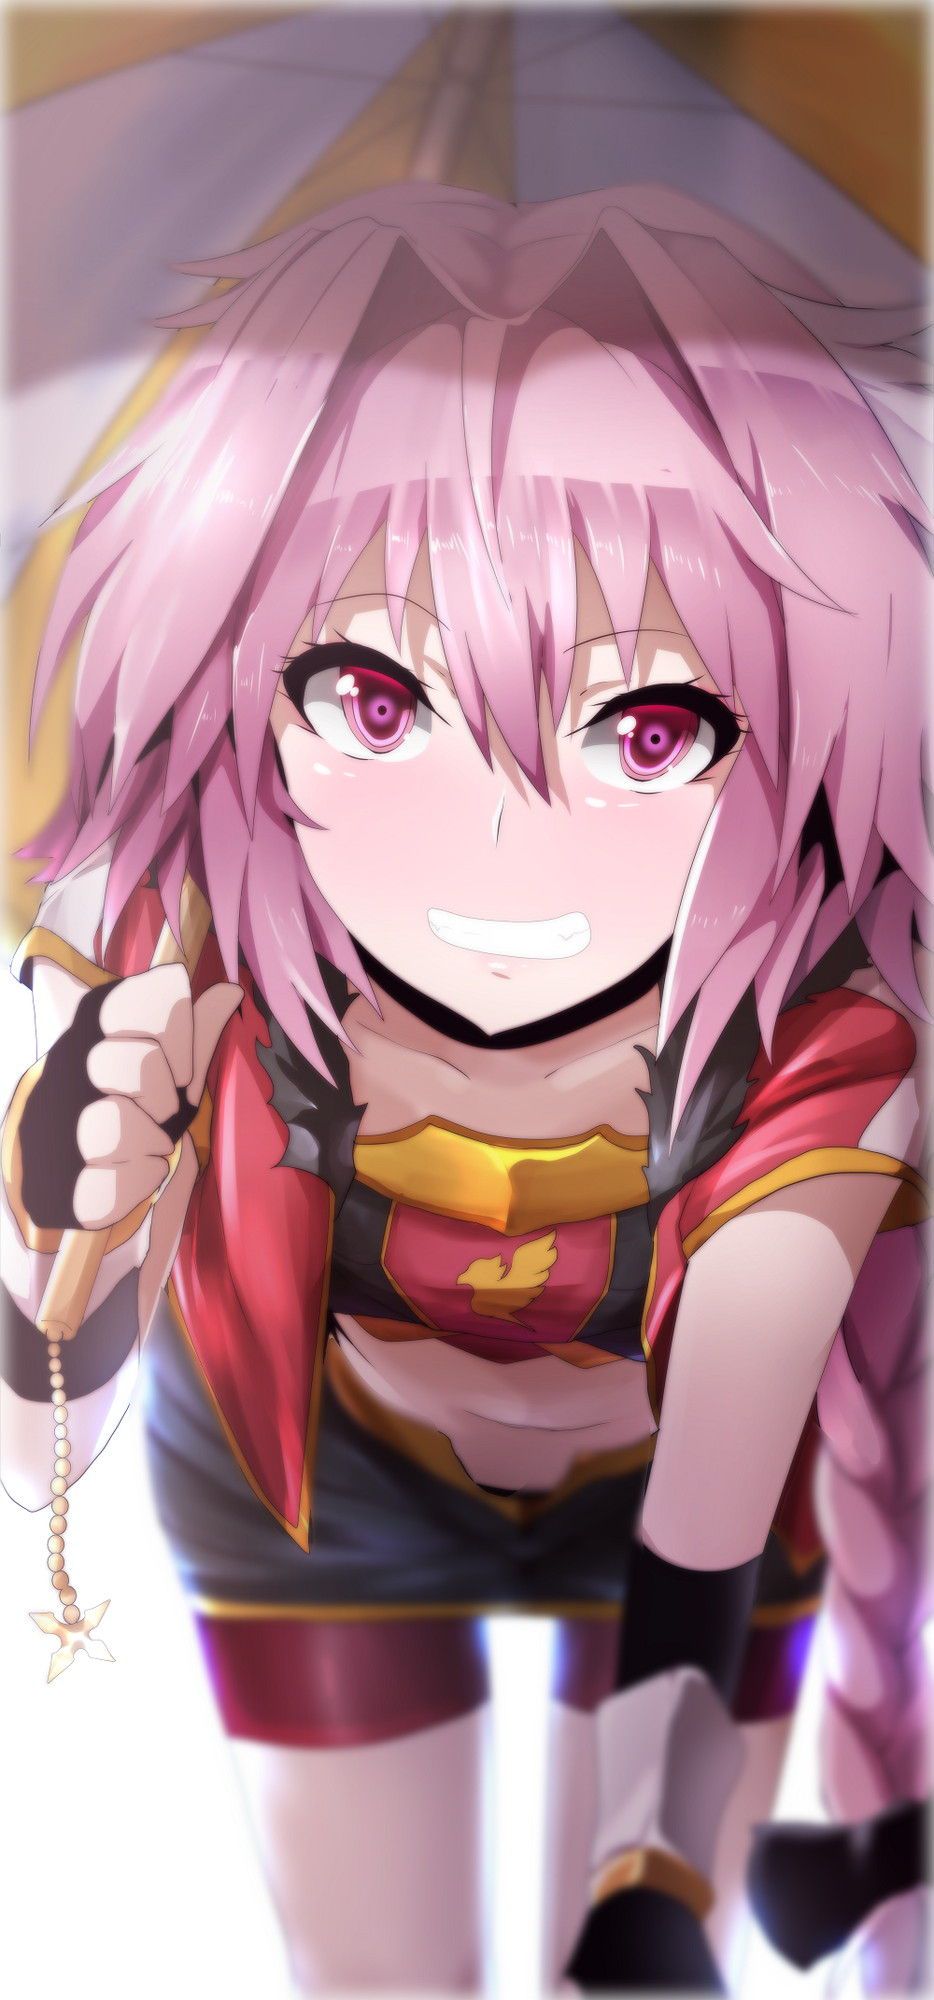 Fate Grand Order: Astorfo's cute picture furnace image summary 11